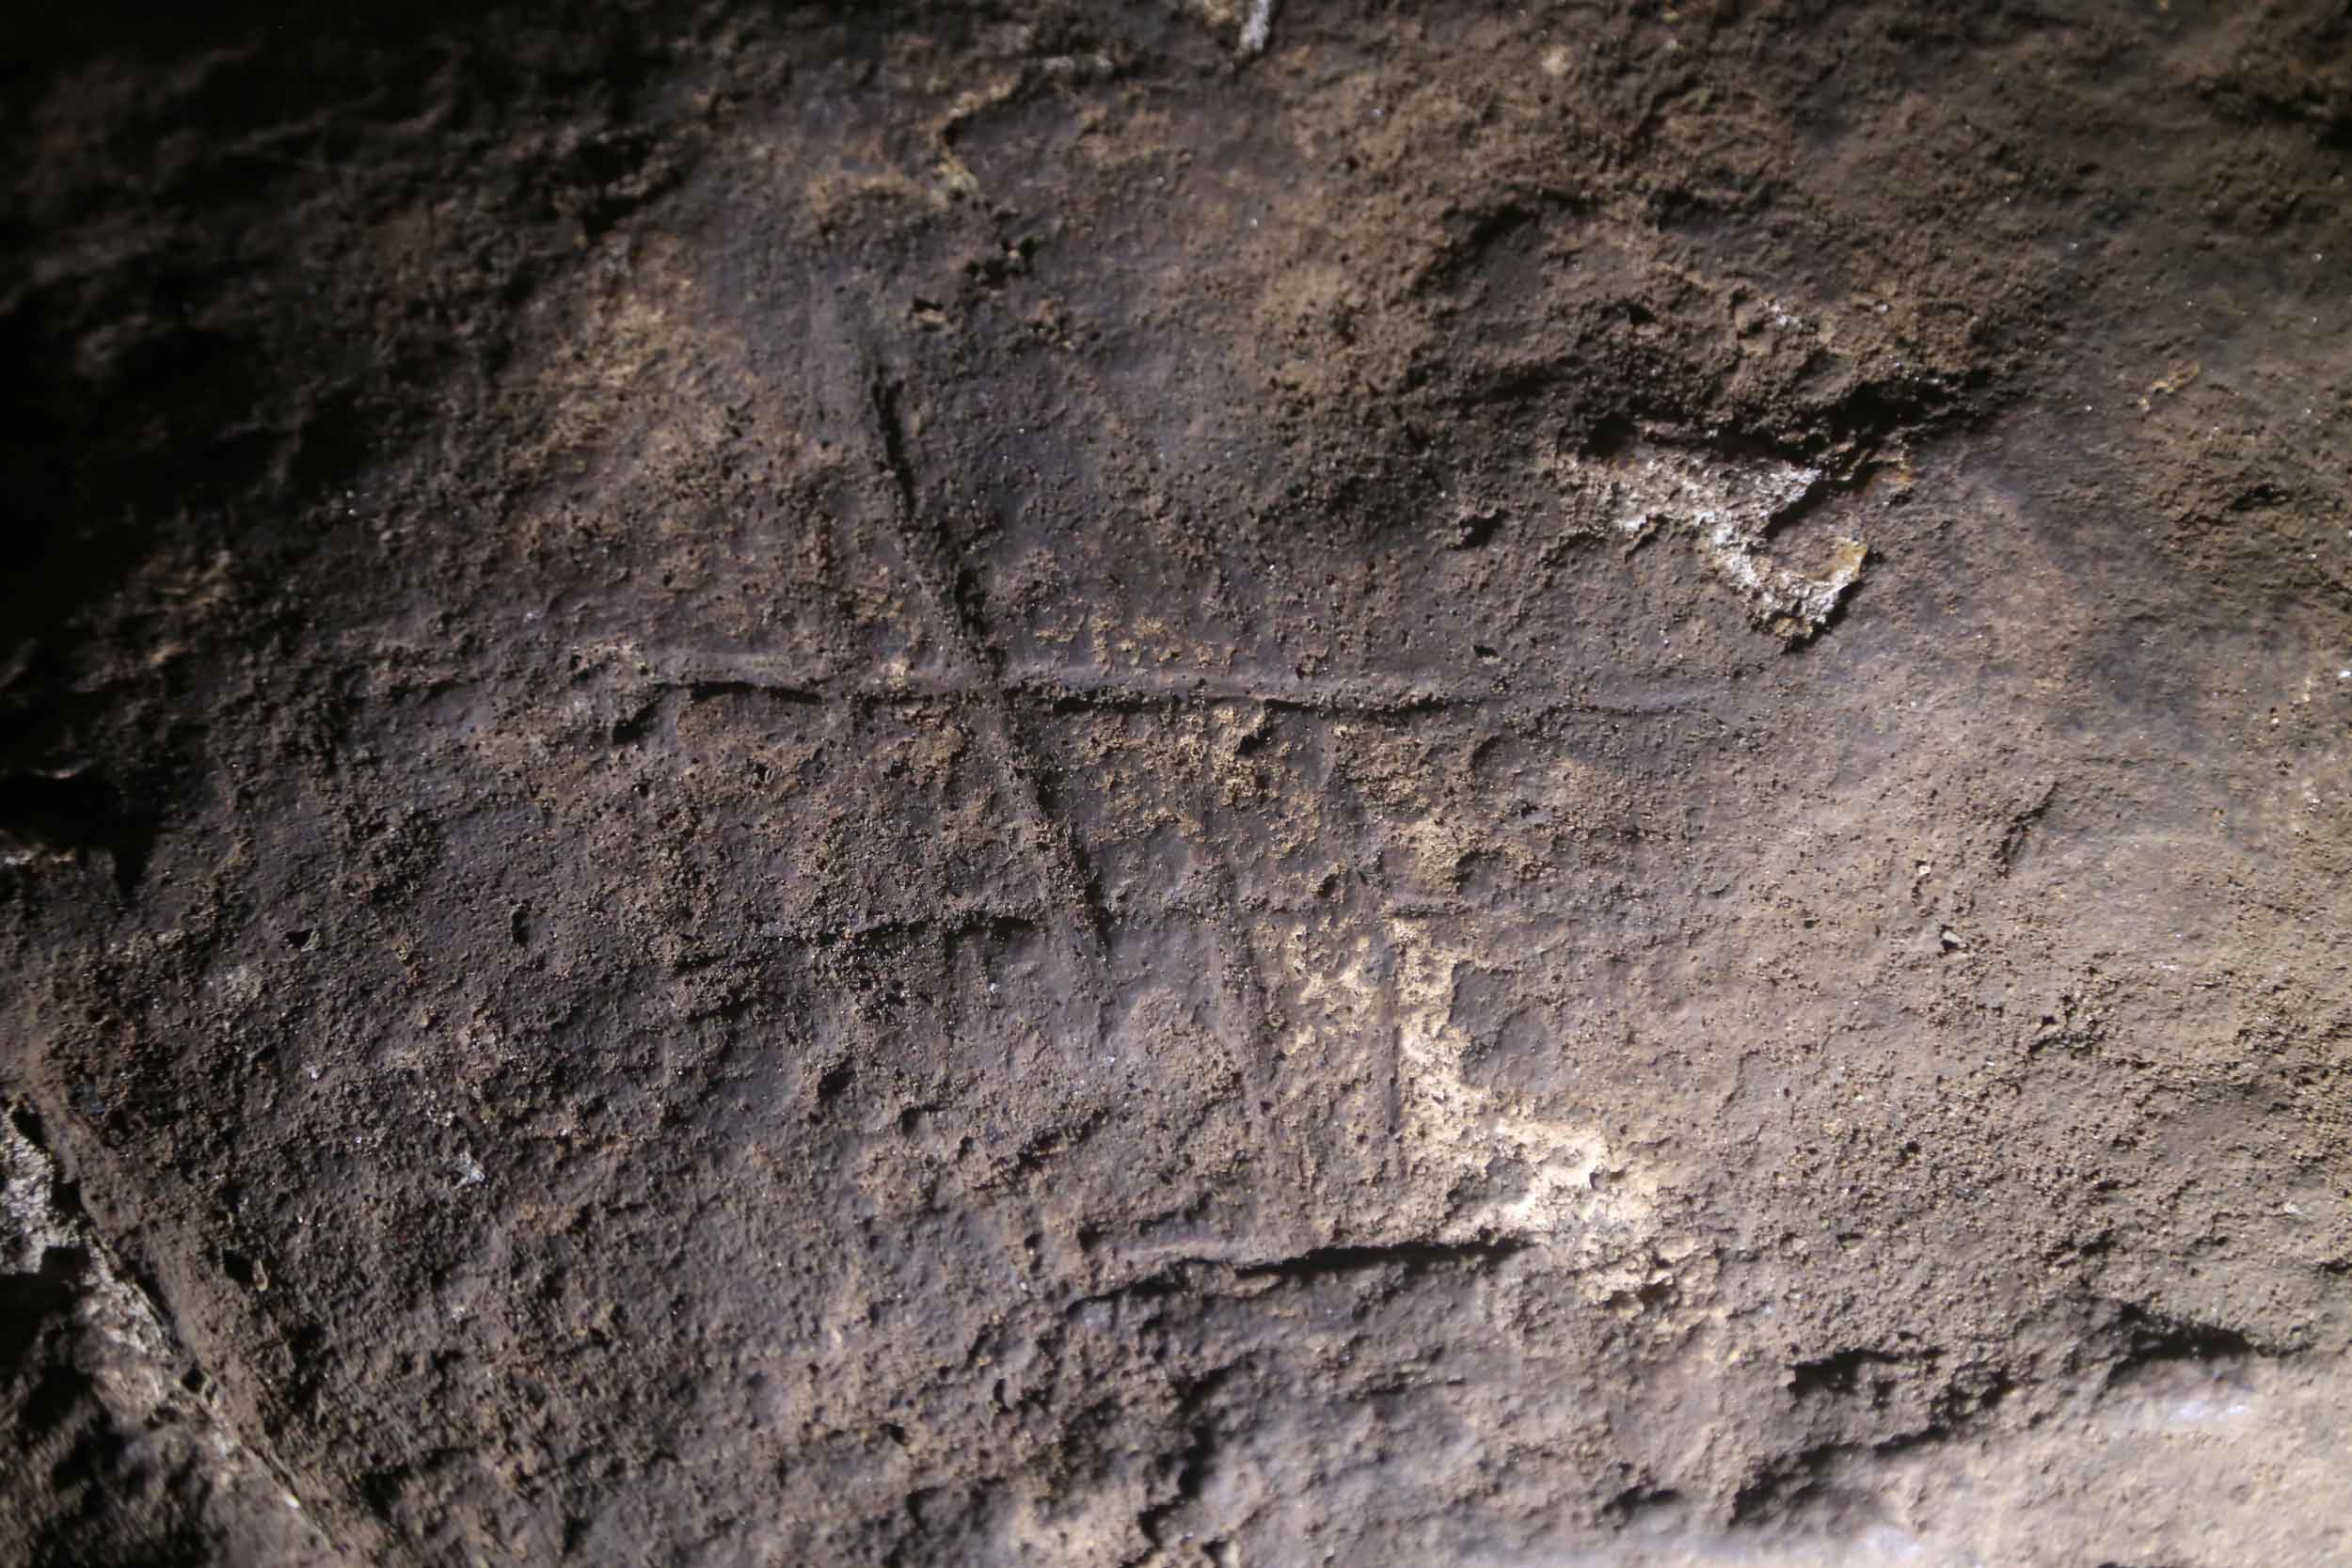 An engraved marking that resembles a hashtag on the floor of a cave